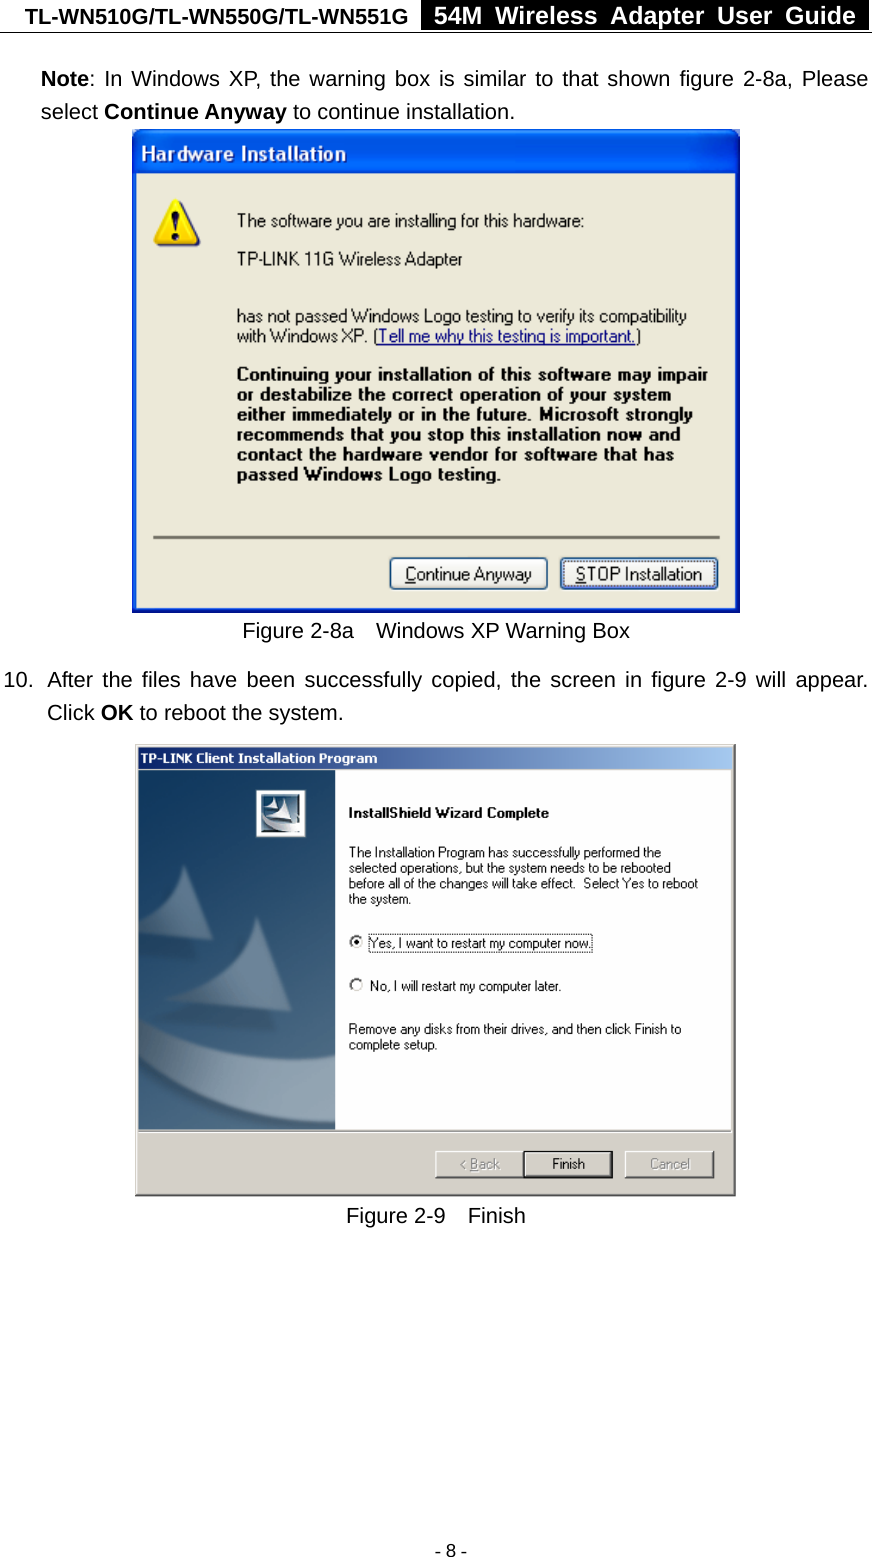 TL-WN510G/TL-WN550G/TL-WN551G  54M Wireless Adapter User Guide  Note: In Windows XP, the warning box is similar to that shown figure 2-8a, Please select Continue Anyway to continue installation.  Figure 2-8a    Windows XP Warning Box 10.  After the files have been successfully copied, the screen in figure 2-9 will appear. Click OK to reboot the system.  Figure 2-9  Finish    - 8 -